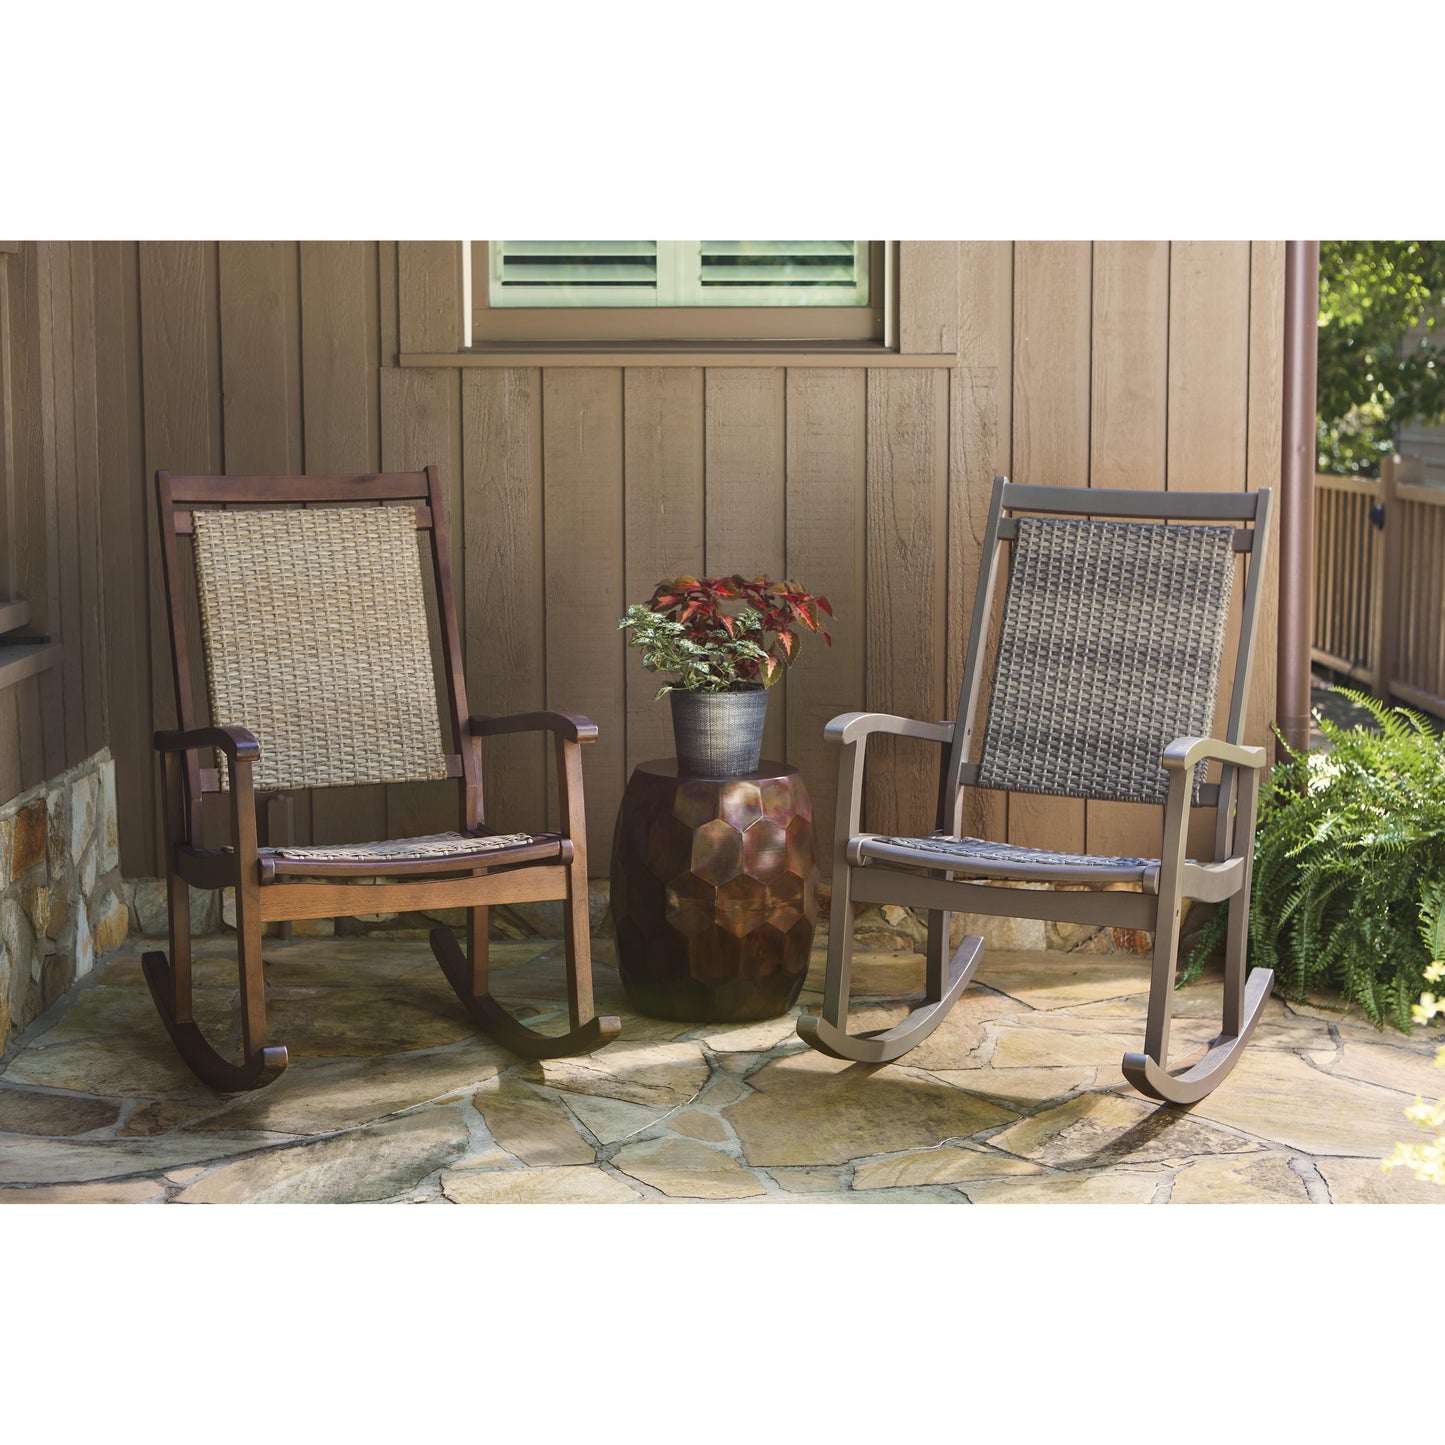 Signature Design by Ashley Outdoor Seating Rocking Chairs P168-828 IMAGE 9